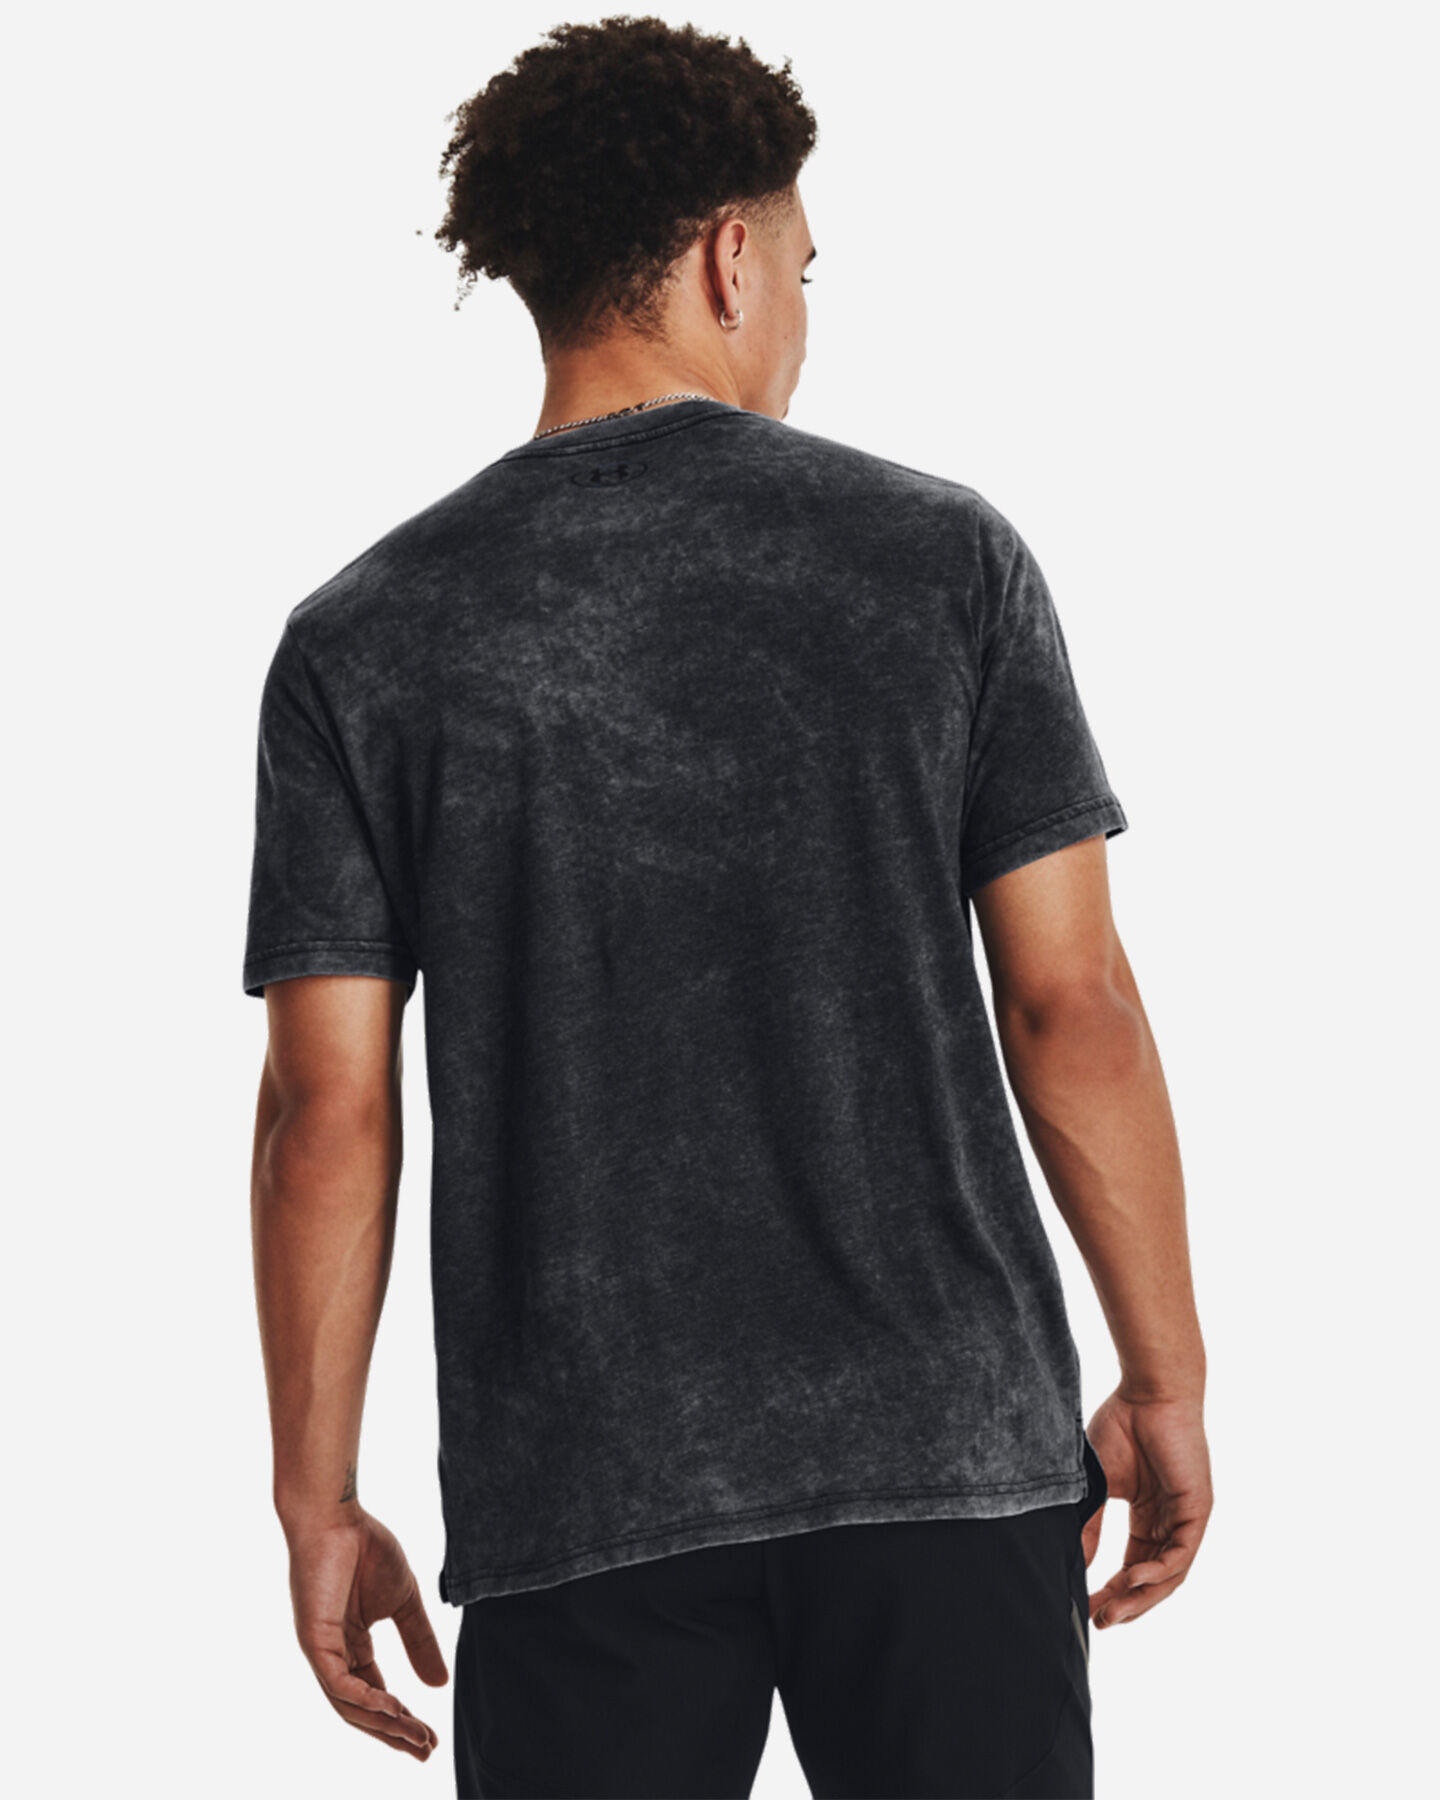  T-Shirt UNDER ARMOUR LOGO ELEVET CORE WASH M S5579486|0001|LG scatto 1